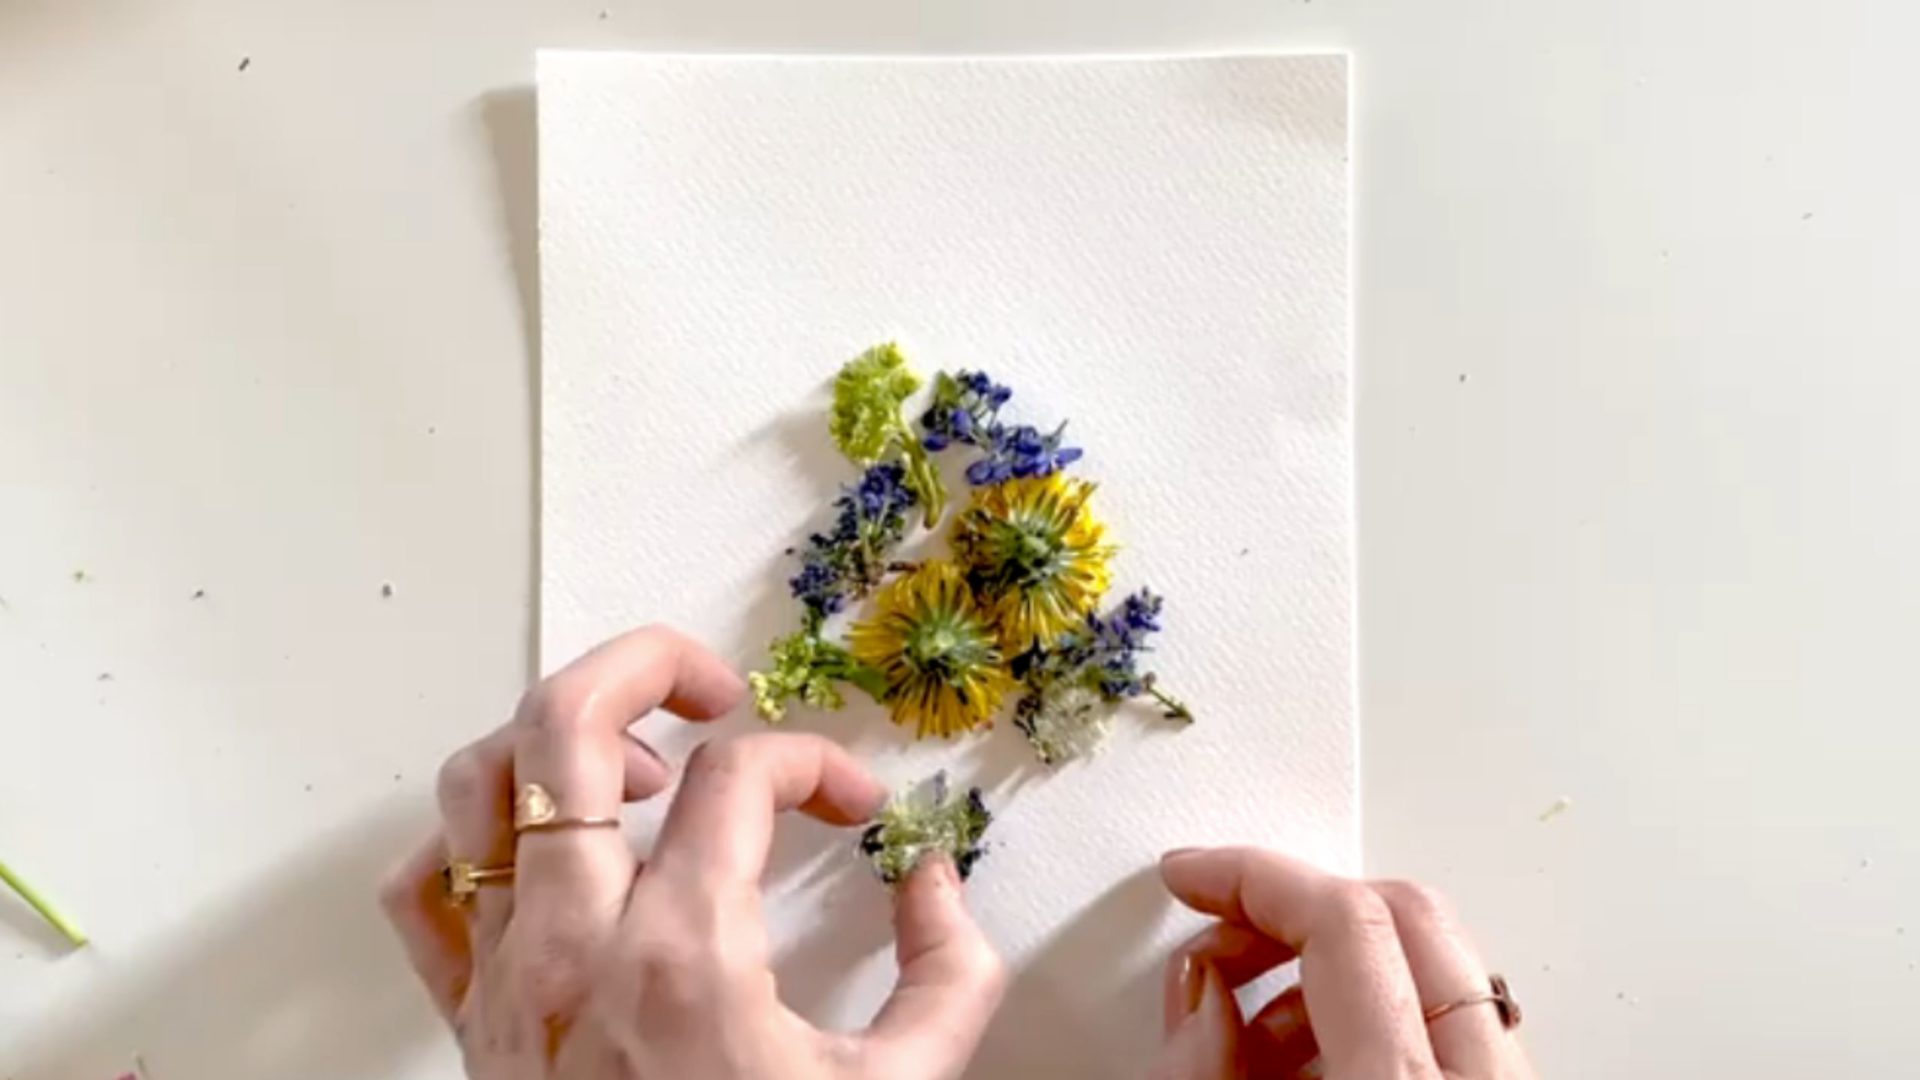 Hands carefully placing an assortment of wildflowers on a paper towel.